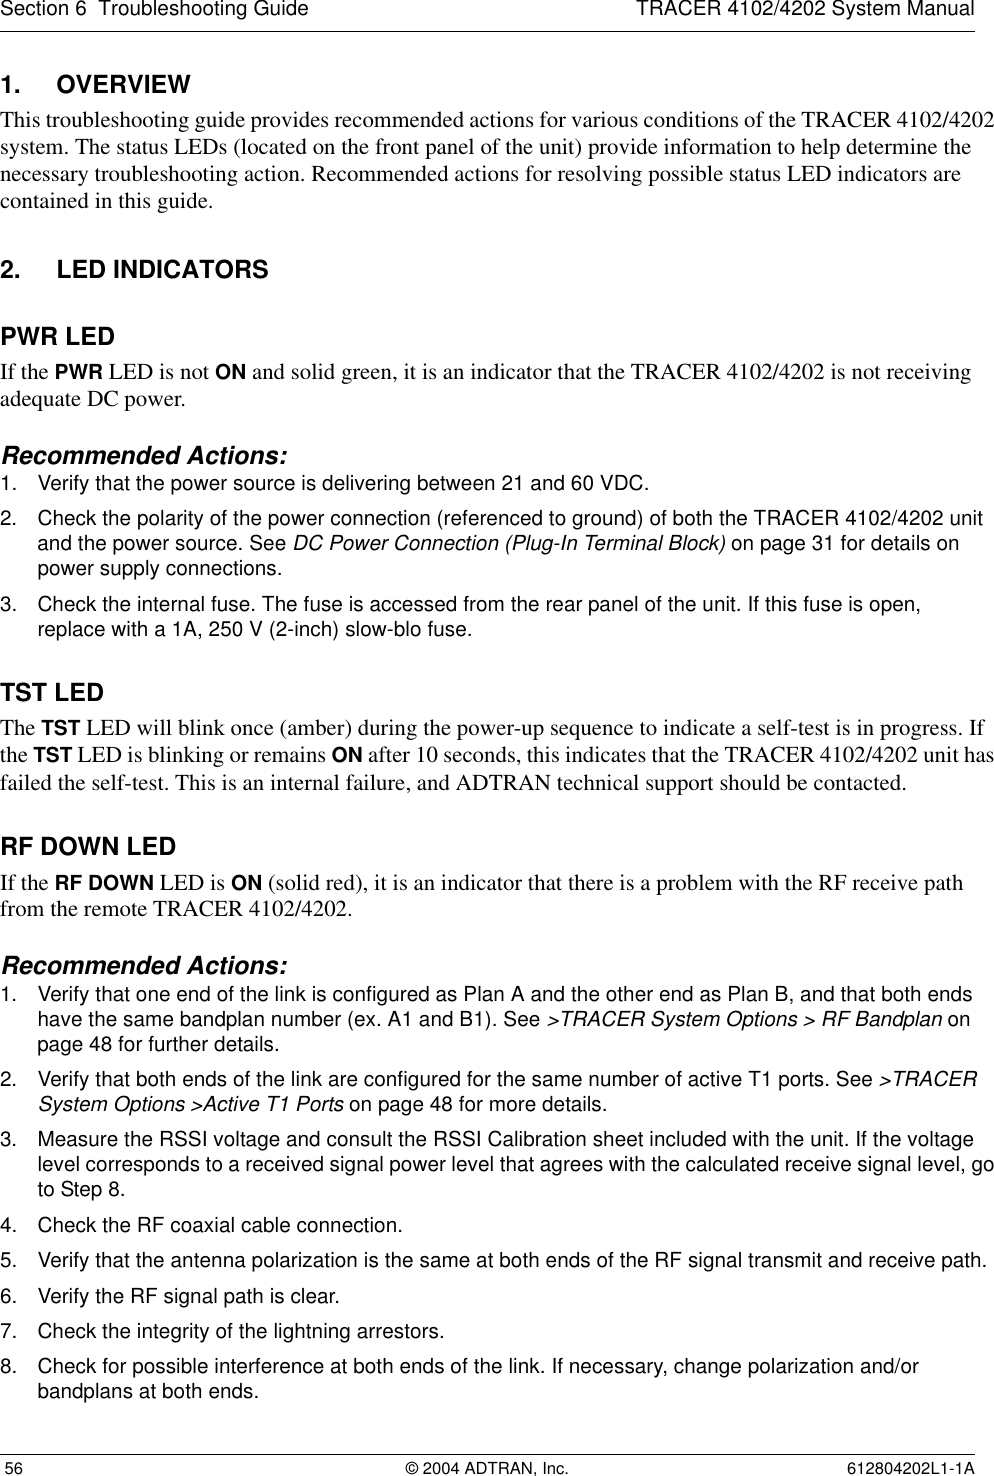 Section 6  Troubleshooting Guide TRACER 4102/4202 System Manual 56 © 2004 ADTRAN, Inc. 612804202L1-1A1. OVERVIEWThis troubleshooting guide provides recommended actions for various conditions of the TRACER 4102/4202 system. The status LEDs (located on the front panel of the unit) provide information to help determine the necessary troubleshooting action. Recommended actions for resolving possible status LED indicators are contained in this guide.2. LED INDICATORSPWR LEDIf the PWR LED is not ON and solid green, it is an indicator that the TRACER 4102/4202 is not receiving adequate DC power. Recommended Actions:1. Verify that the power source is delivering between 21 and 60 VDC.2. Check the polarity of the power connection (referenced to ground) of both the TRACER 4102/4202 unit and the power source. See DC Power Connection (Plug-In Terminal Block) on page 31 for details on power supply connections.3. Check the internal fuse. The fuse is accessed from the rear panel of the unit. If this fuse is open,replace with a 1A, 250 V (2-inch) slow-blo fuse.TST LEDThe TST LED will blink once (amber) during the power-up sequence to indicate a self-test is in progress. If the TST LED is blinking or remains ON after 10 seconds, this indicates that the TRACER 4102/4202 unit has failed the self-test. This is an internal failure, and ADTRAN technical support should be contacted.RF DOWN LEDIf the RF DOWN LED is ON (solid red), it is an indicator that there is a problem with the RF receive path from the remote TRACER 4102/4202.Recommended Actions:1. Verify that one end of the link is configured as Plan A and the other end as Plan B, and that both ends have the same bandplan number (ex. A1 and B1). See &gt;TRACER System Options &gt; RF Bandplan on page 48 for further details.2. Verify that both ends of the link are configured for the same number of active T1 ports. See &gt;TRACER System Options &gt;Active T1 Ports on page 48 for more details.3. Measure the RSSI voltage and consult the RSSI Calibration sheet included with the unit. If the voltage level corresponds to a received signal power level that agrees with the calculated receive signal level, go to Step 8.4. Check the RF coaxial cable connection.5. Verify that the antenna polarization is the same at both ends of the RF signal transmit and receive path.6. Verify the RF signal path is clear.7. Check the integrity of the lightning arrestors.8. Check for possible interference at both ends of the link. If necessary, change polarization and/or bandplans at both ends.